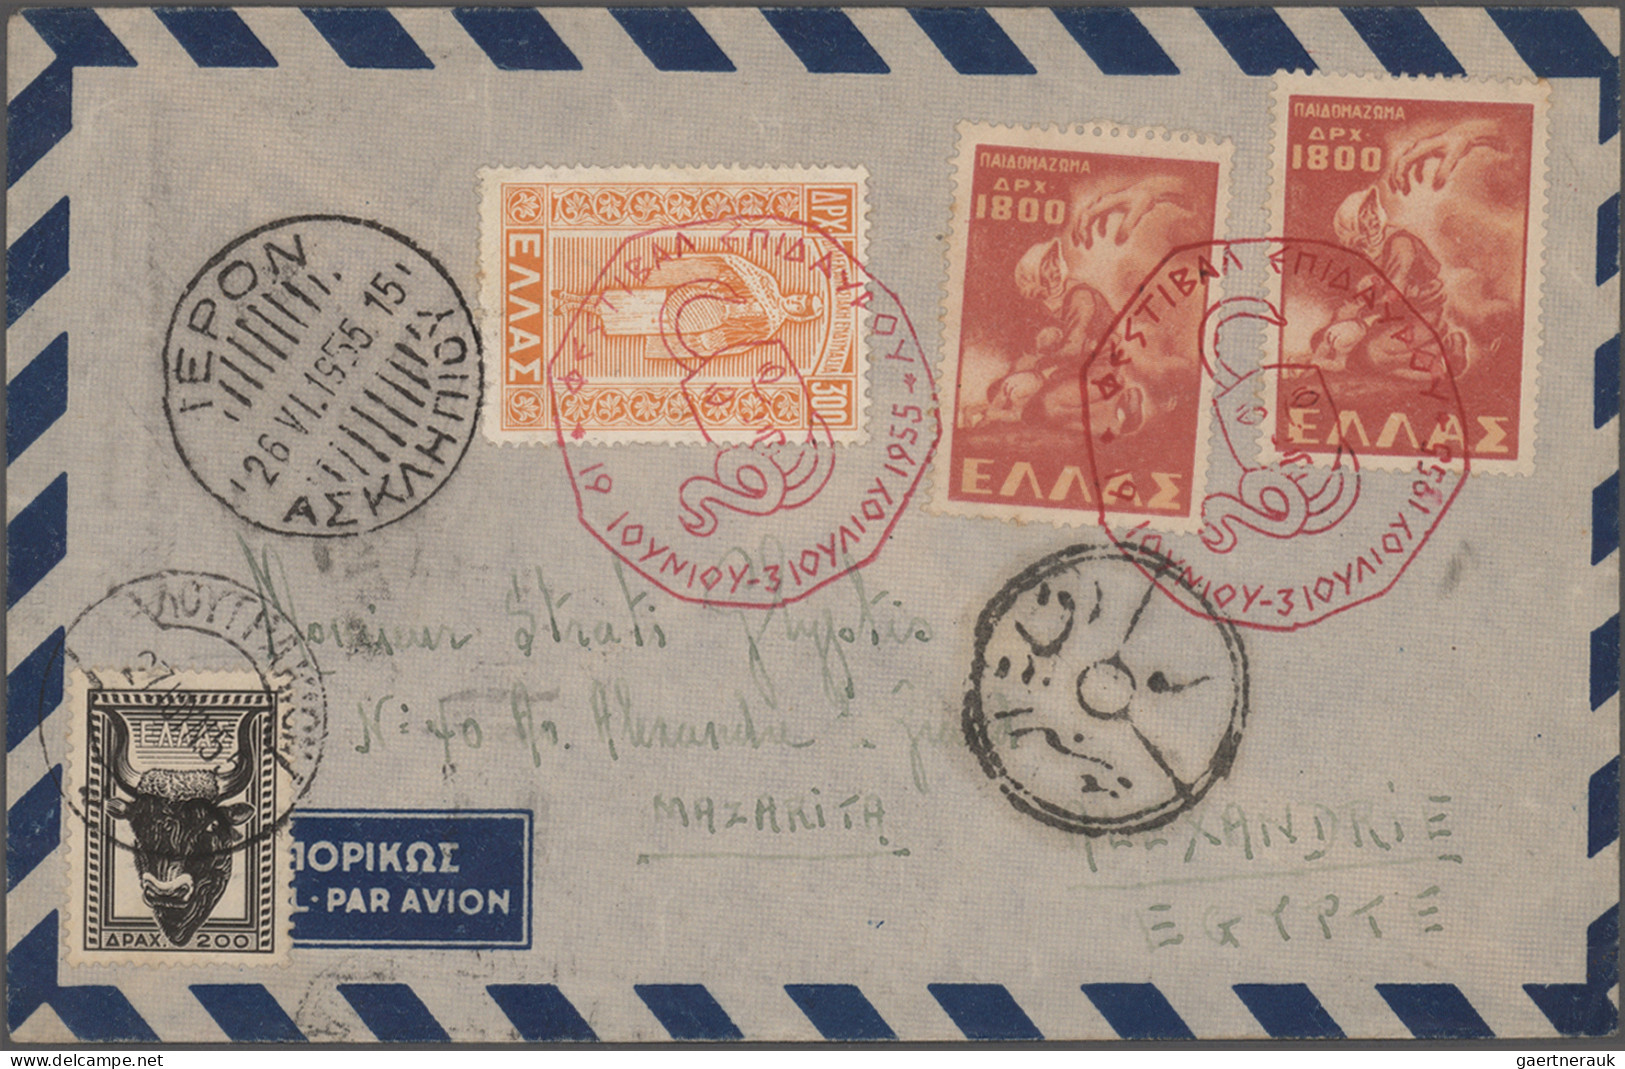 Greece: 1900/1990 (ca.), balance of apprx. 310 covers/cards/few fronts, from som